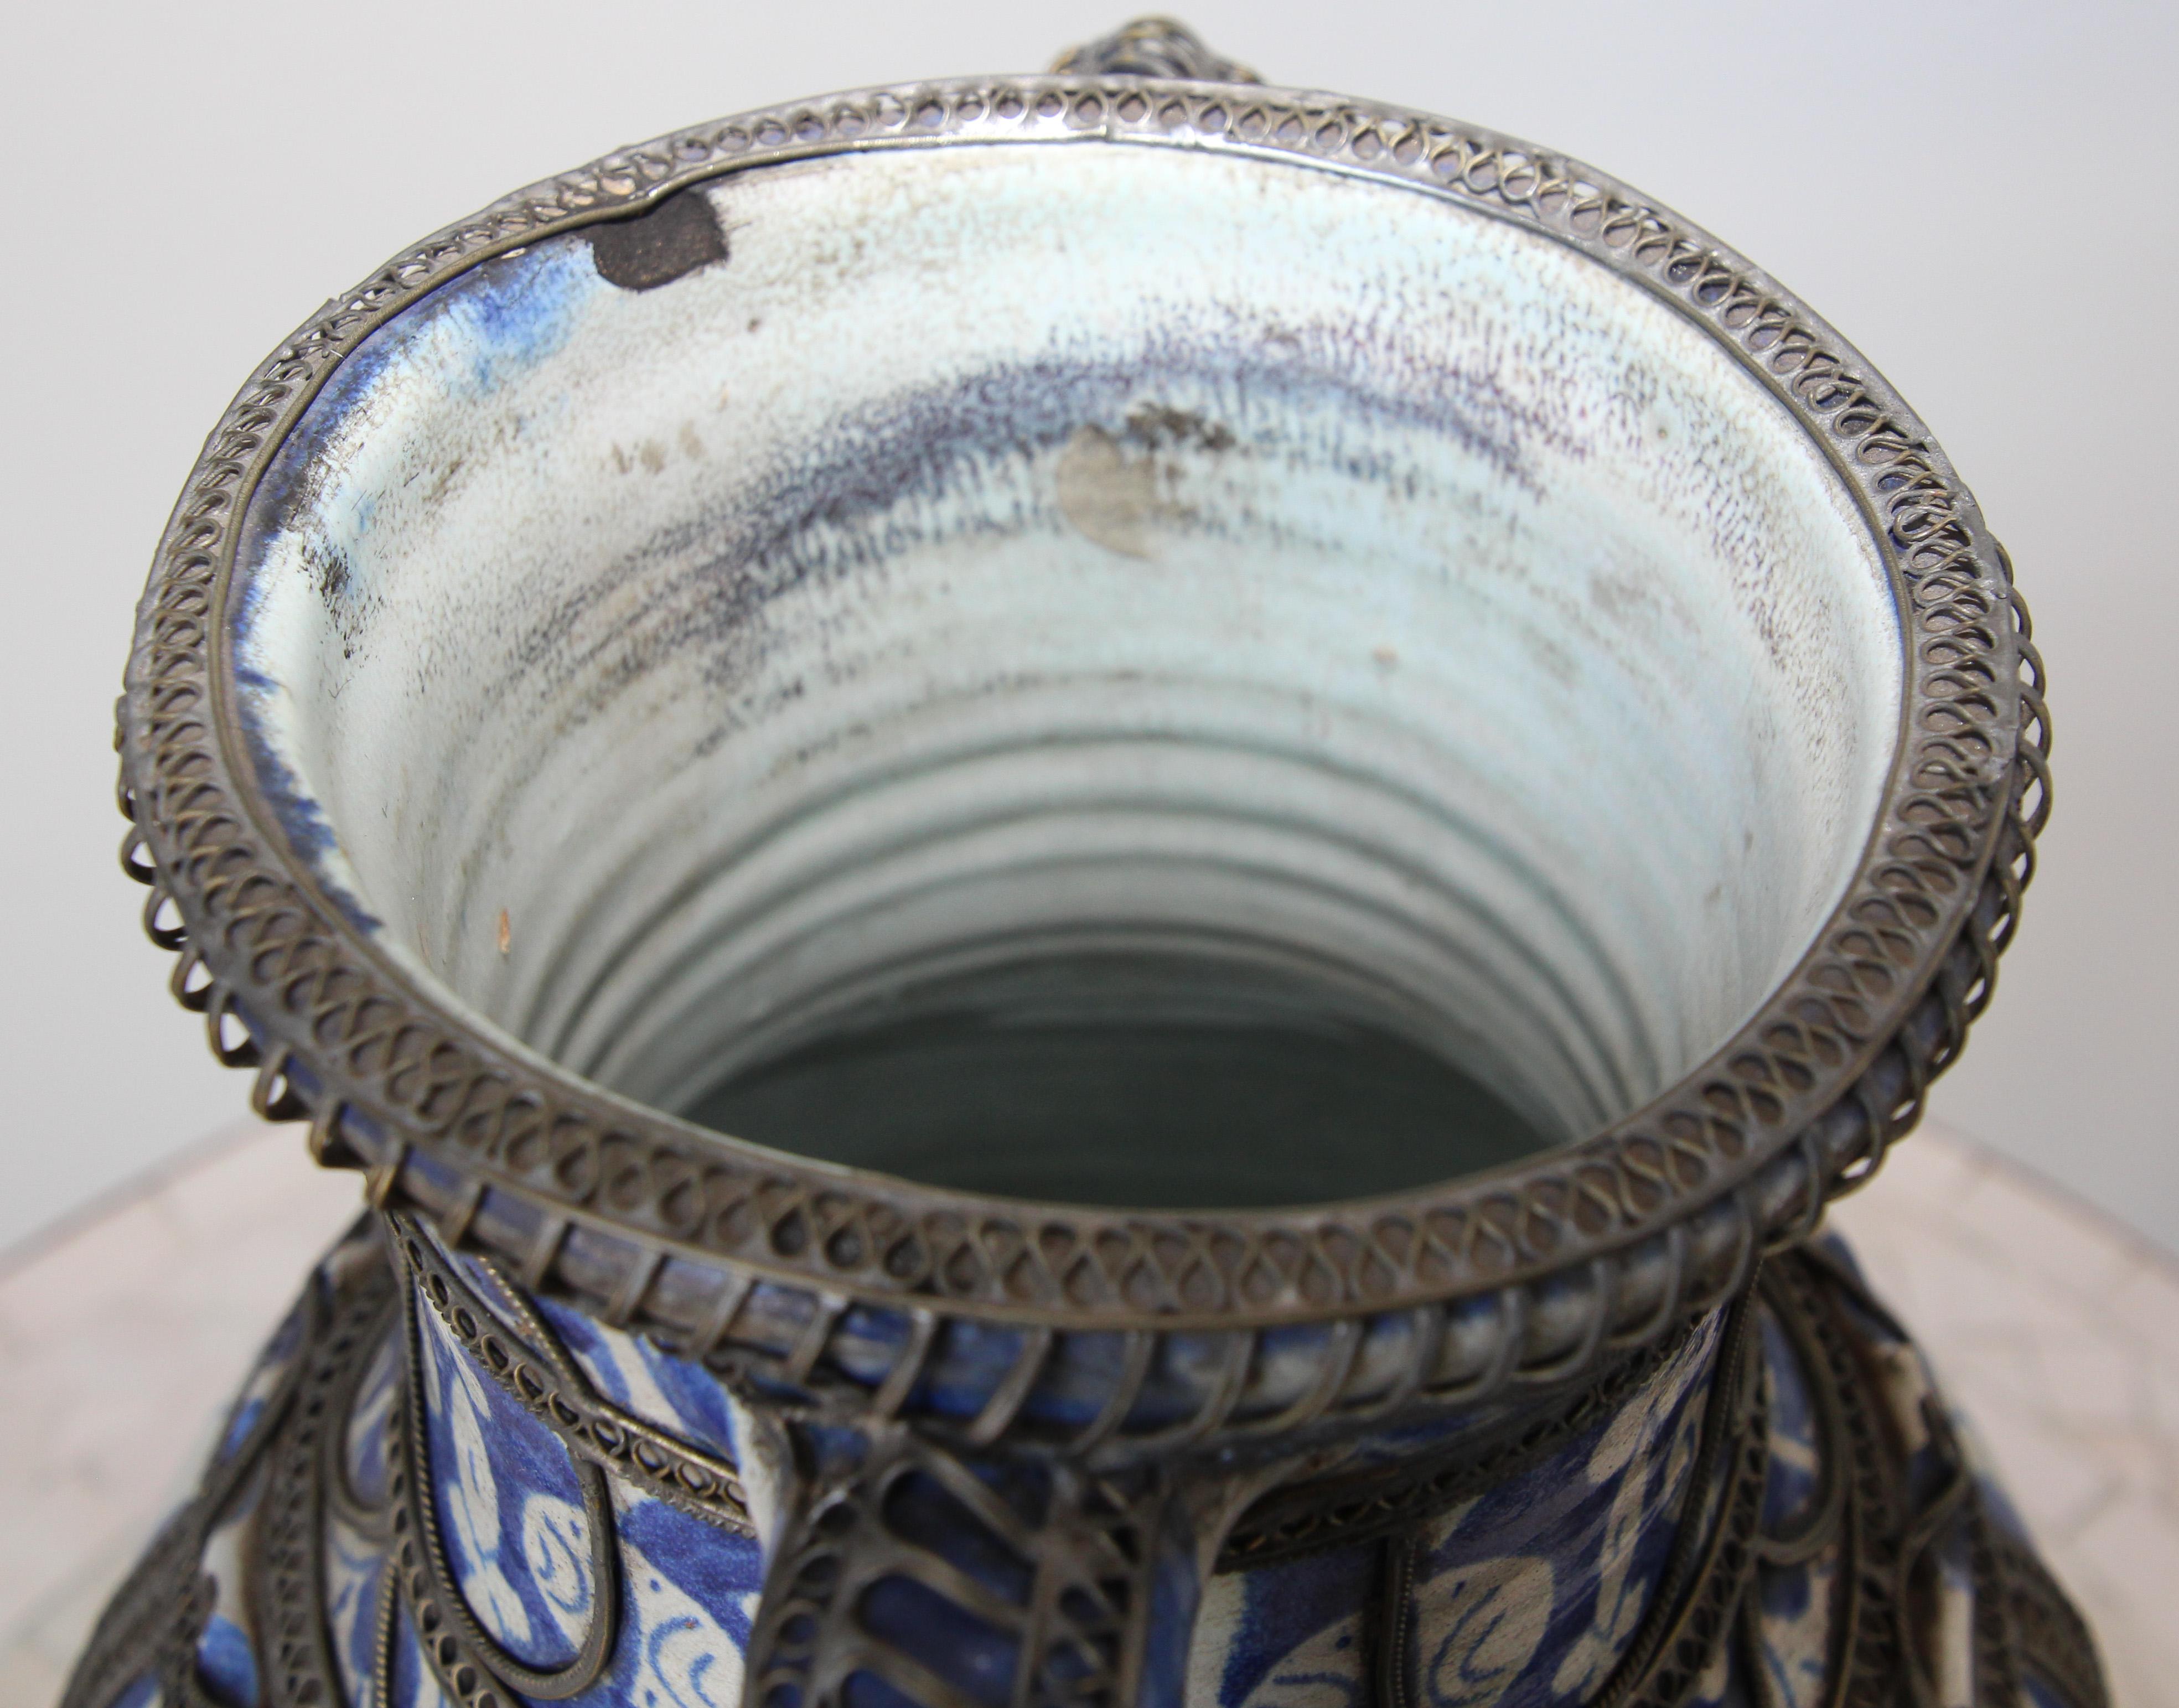  Moroccan Blue & White Ceramic Footed Vase from Fez with Silver Filigree For Sale 8